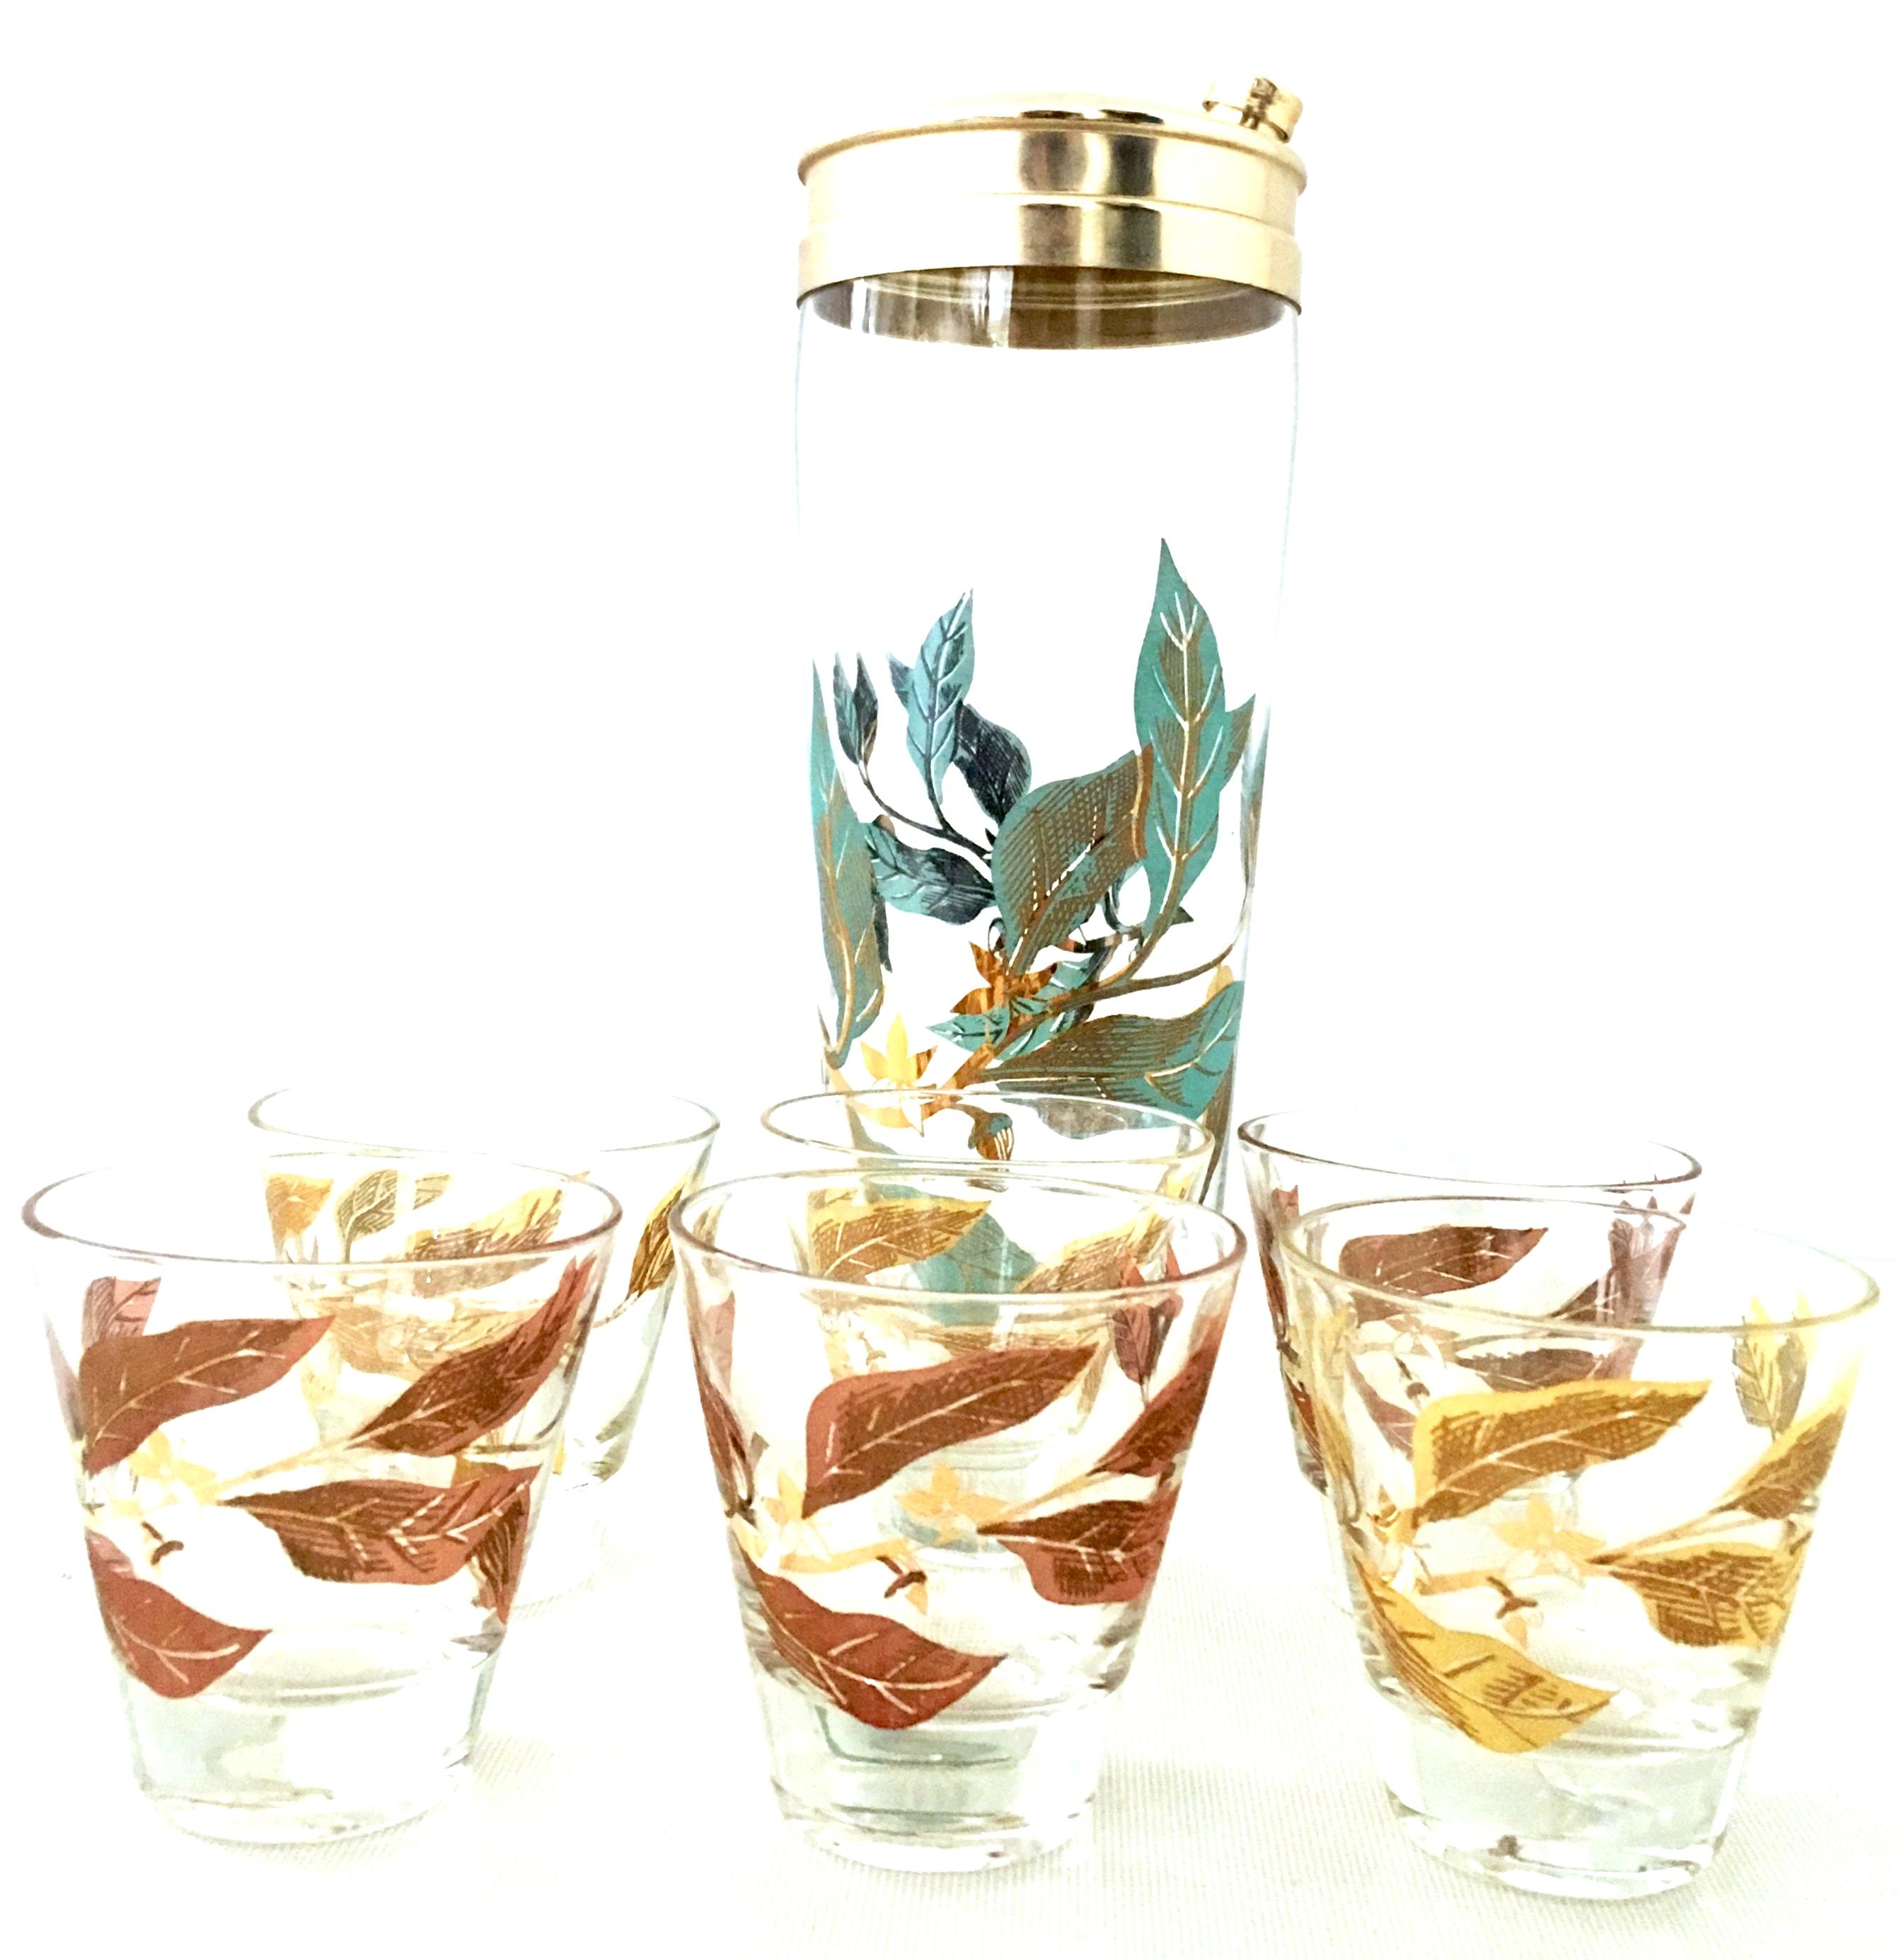 Mid-20th century blown glass and 22-karat gold printed drinks set of seven pieces. This blown glass, printed with 22-karat gold detail set features a leaf motif. Set includes, one cocktail Shaker and six shot glasses. The shot glasses come in two